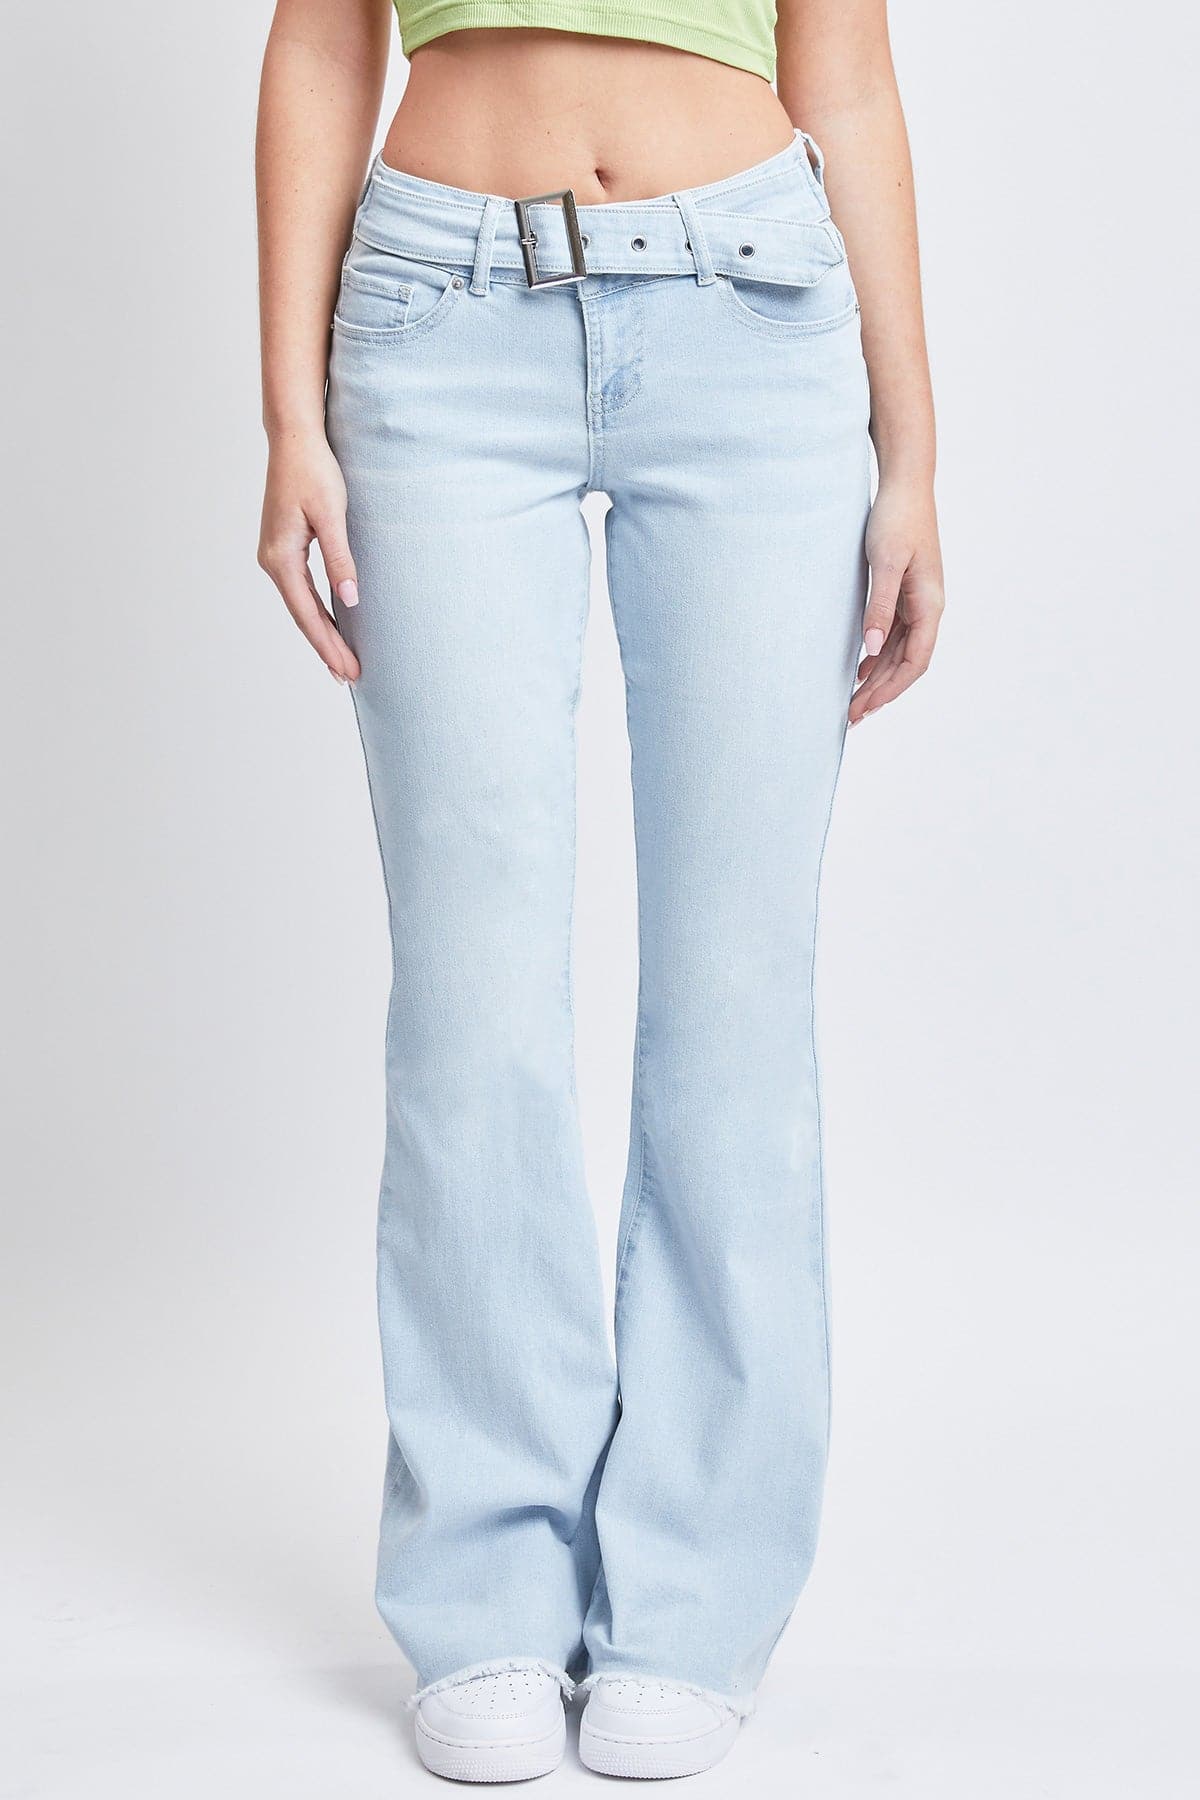 Women's Belted Flare Jeans from YMI – YMI JEANS